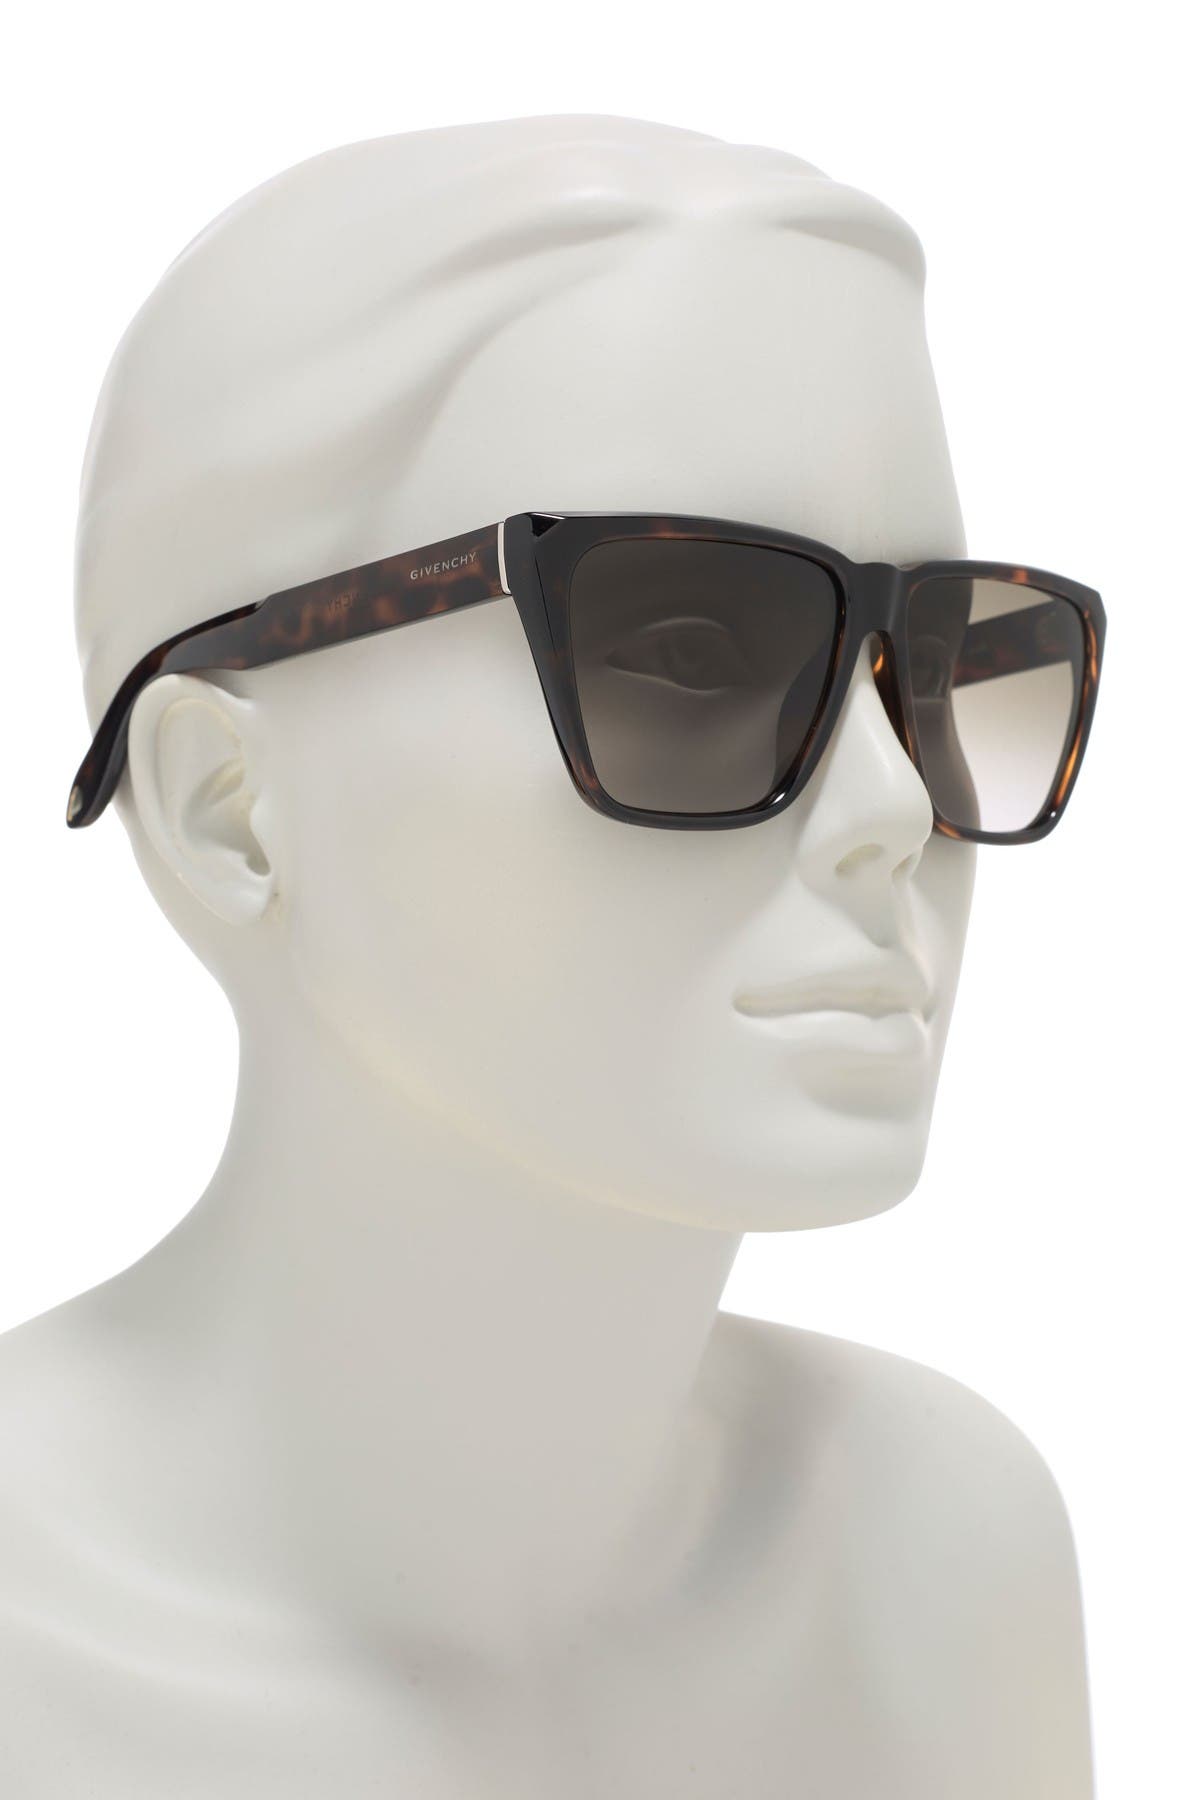 Givenchy | 58mm Flat Top Sunglasses 